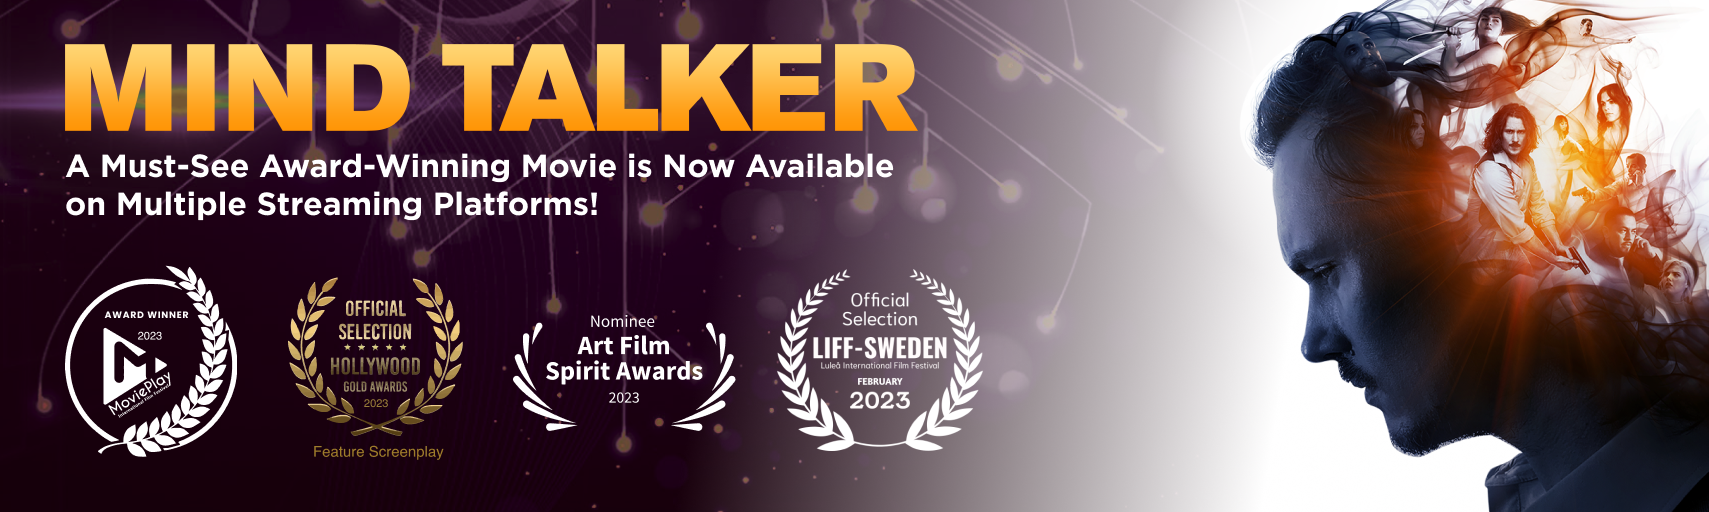 Mind Talker A Must-See Award-Winning Movie is Now Available on Multiple Streaming Platforms